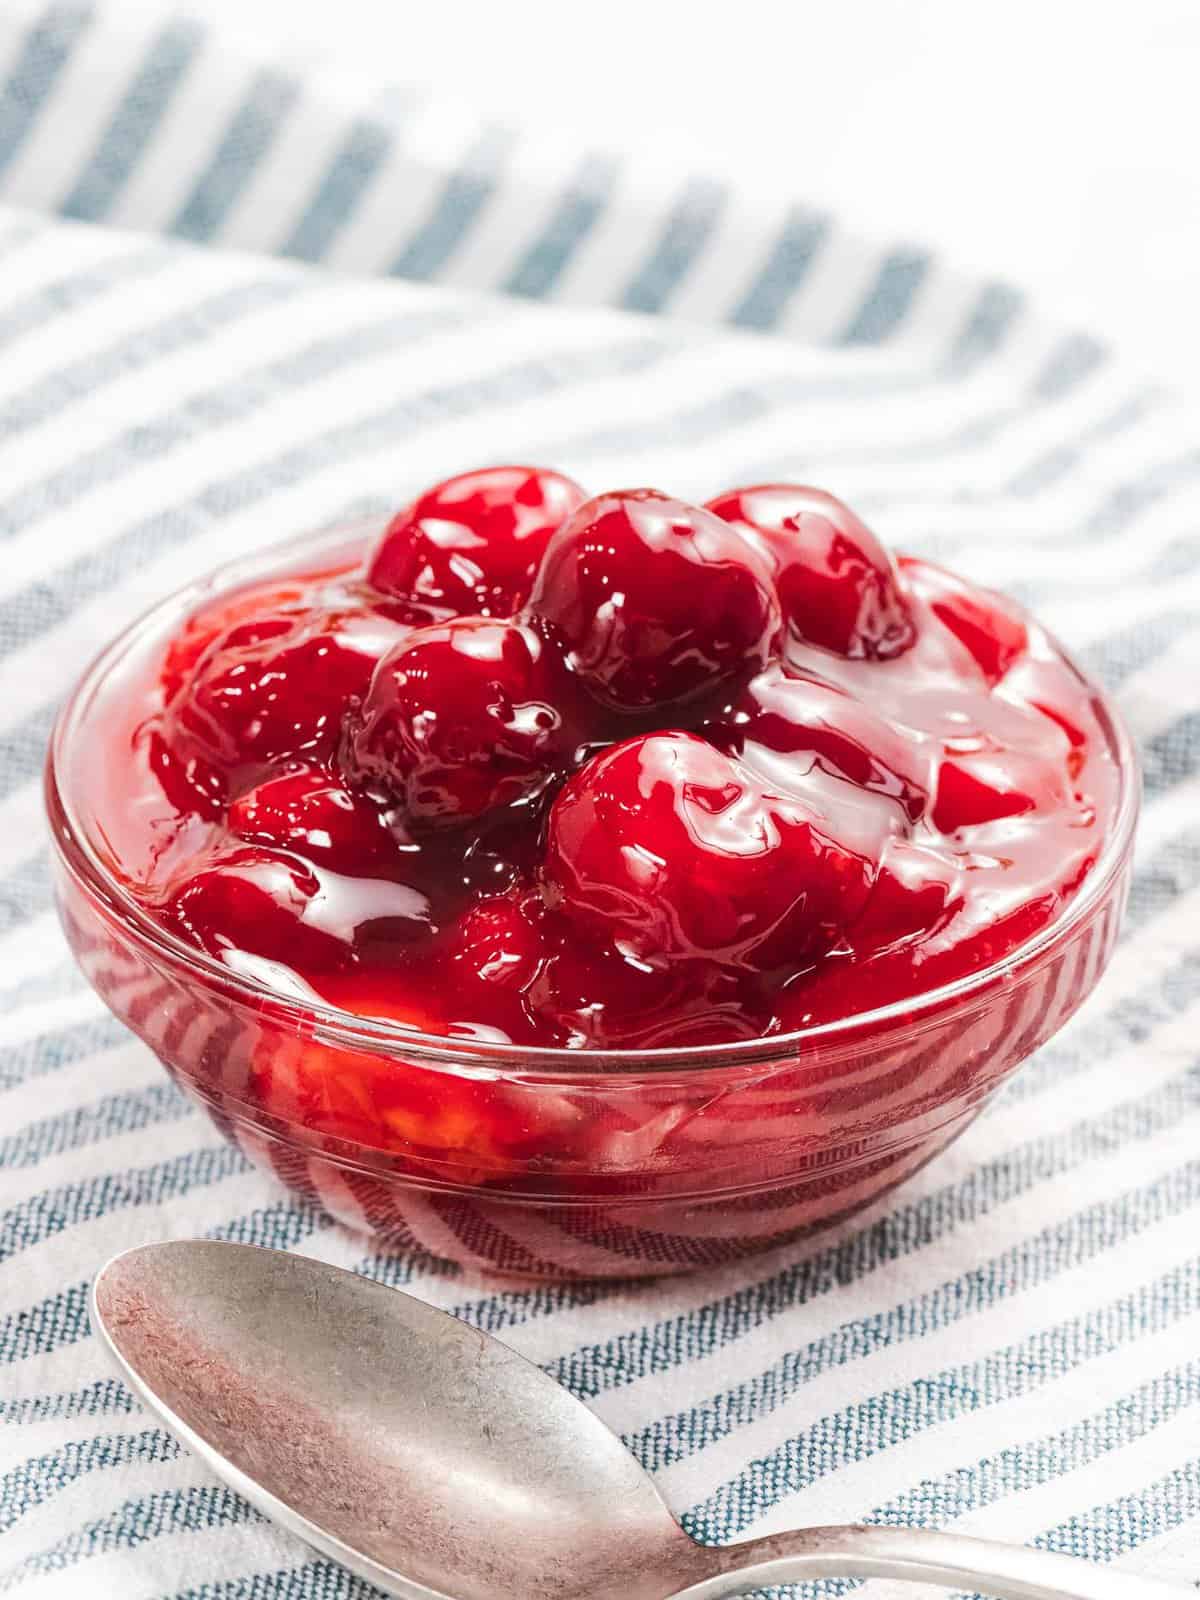 Cherry sauce used for cheesecake topping.